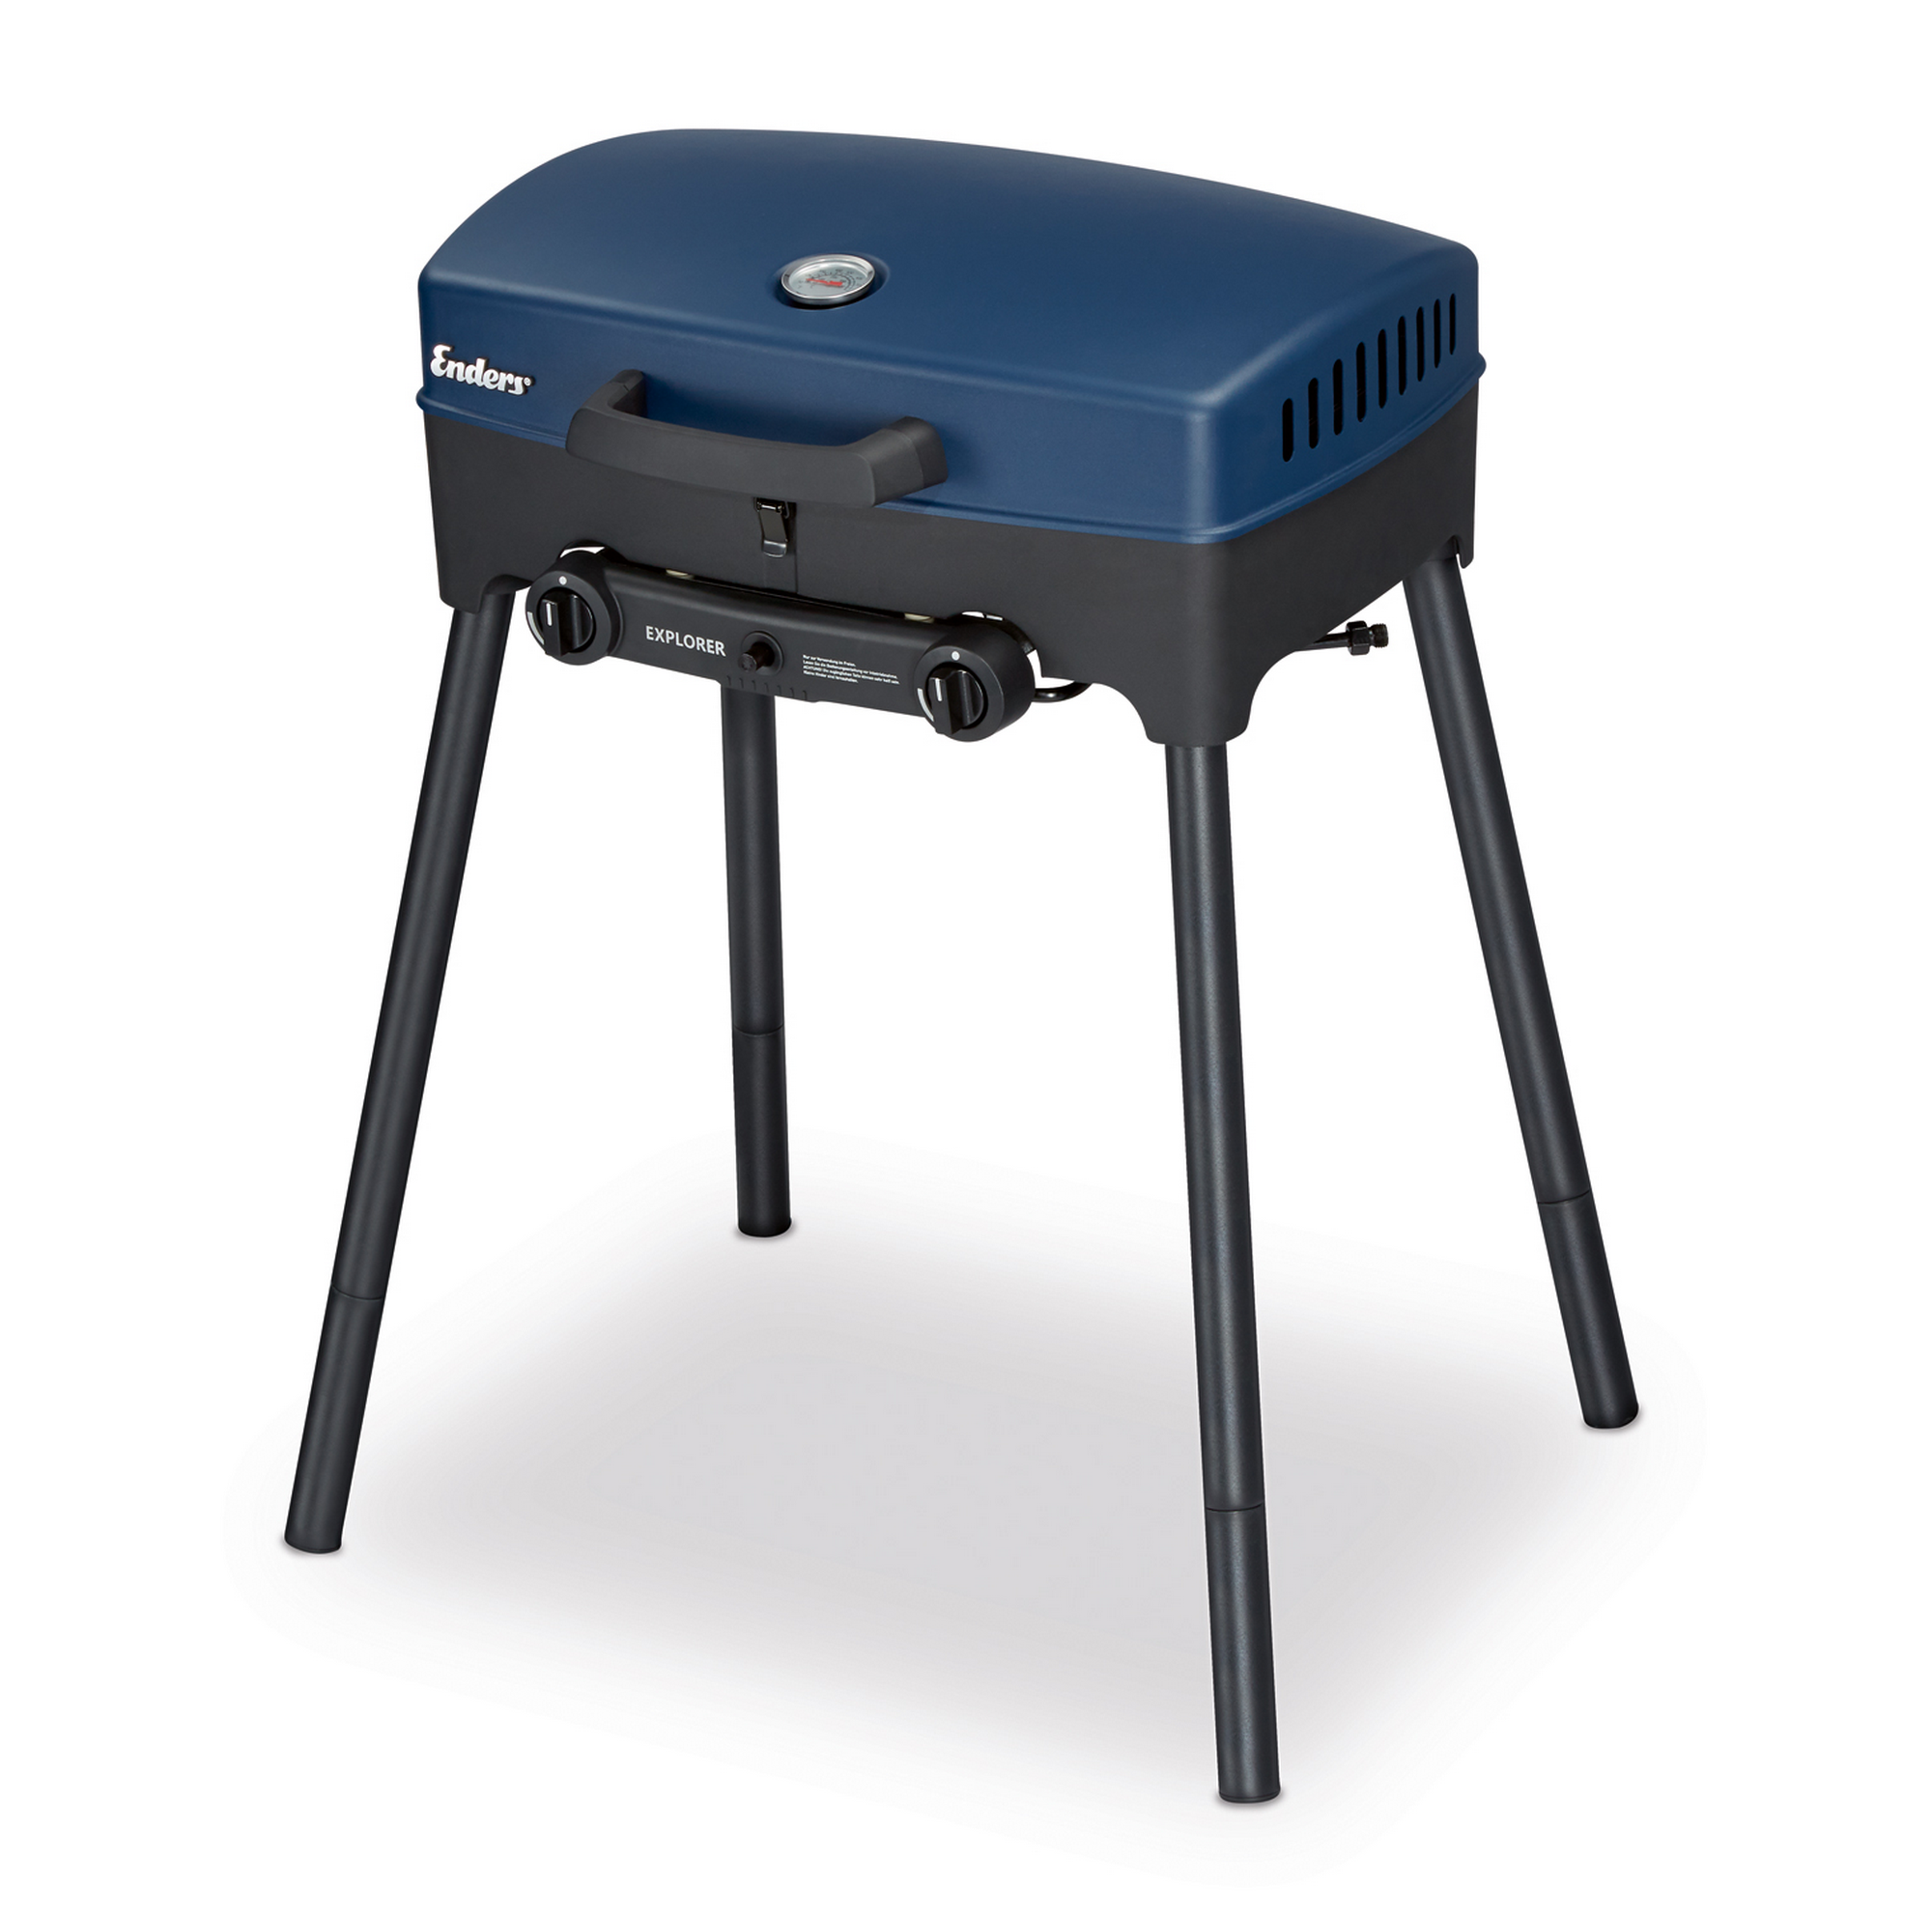 Enders Campinggrill Explorer + product picture